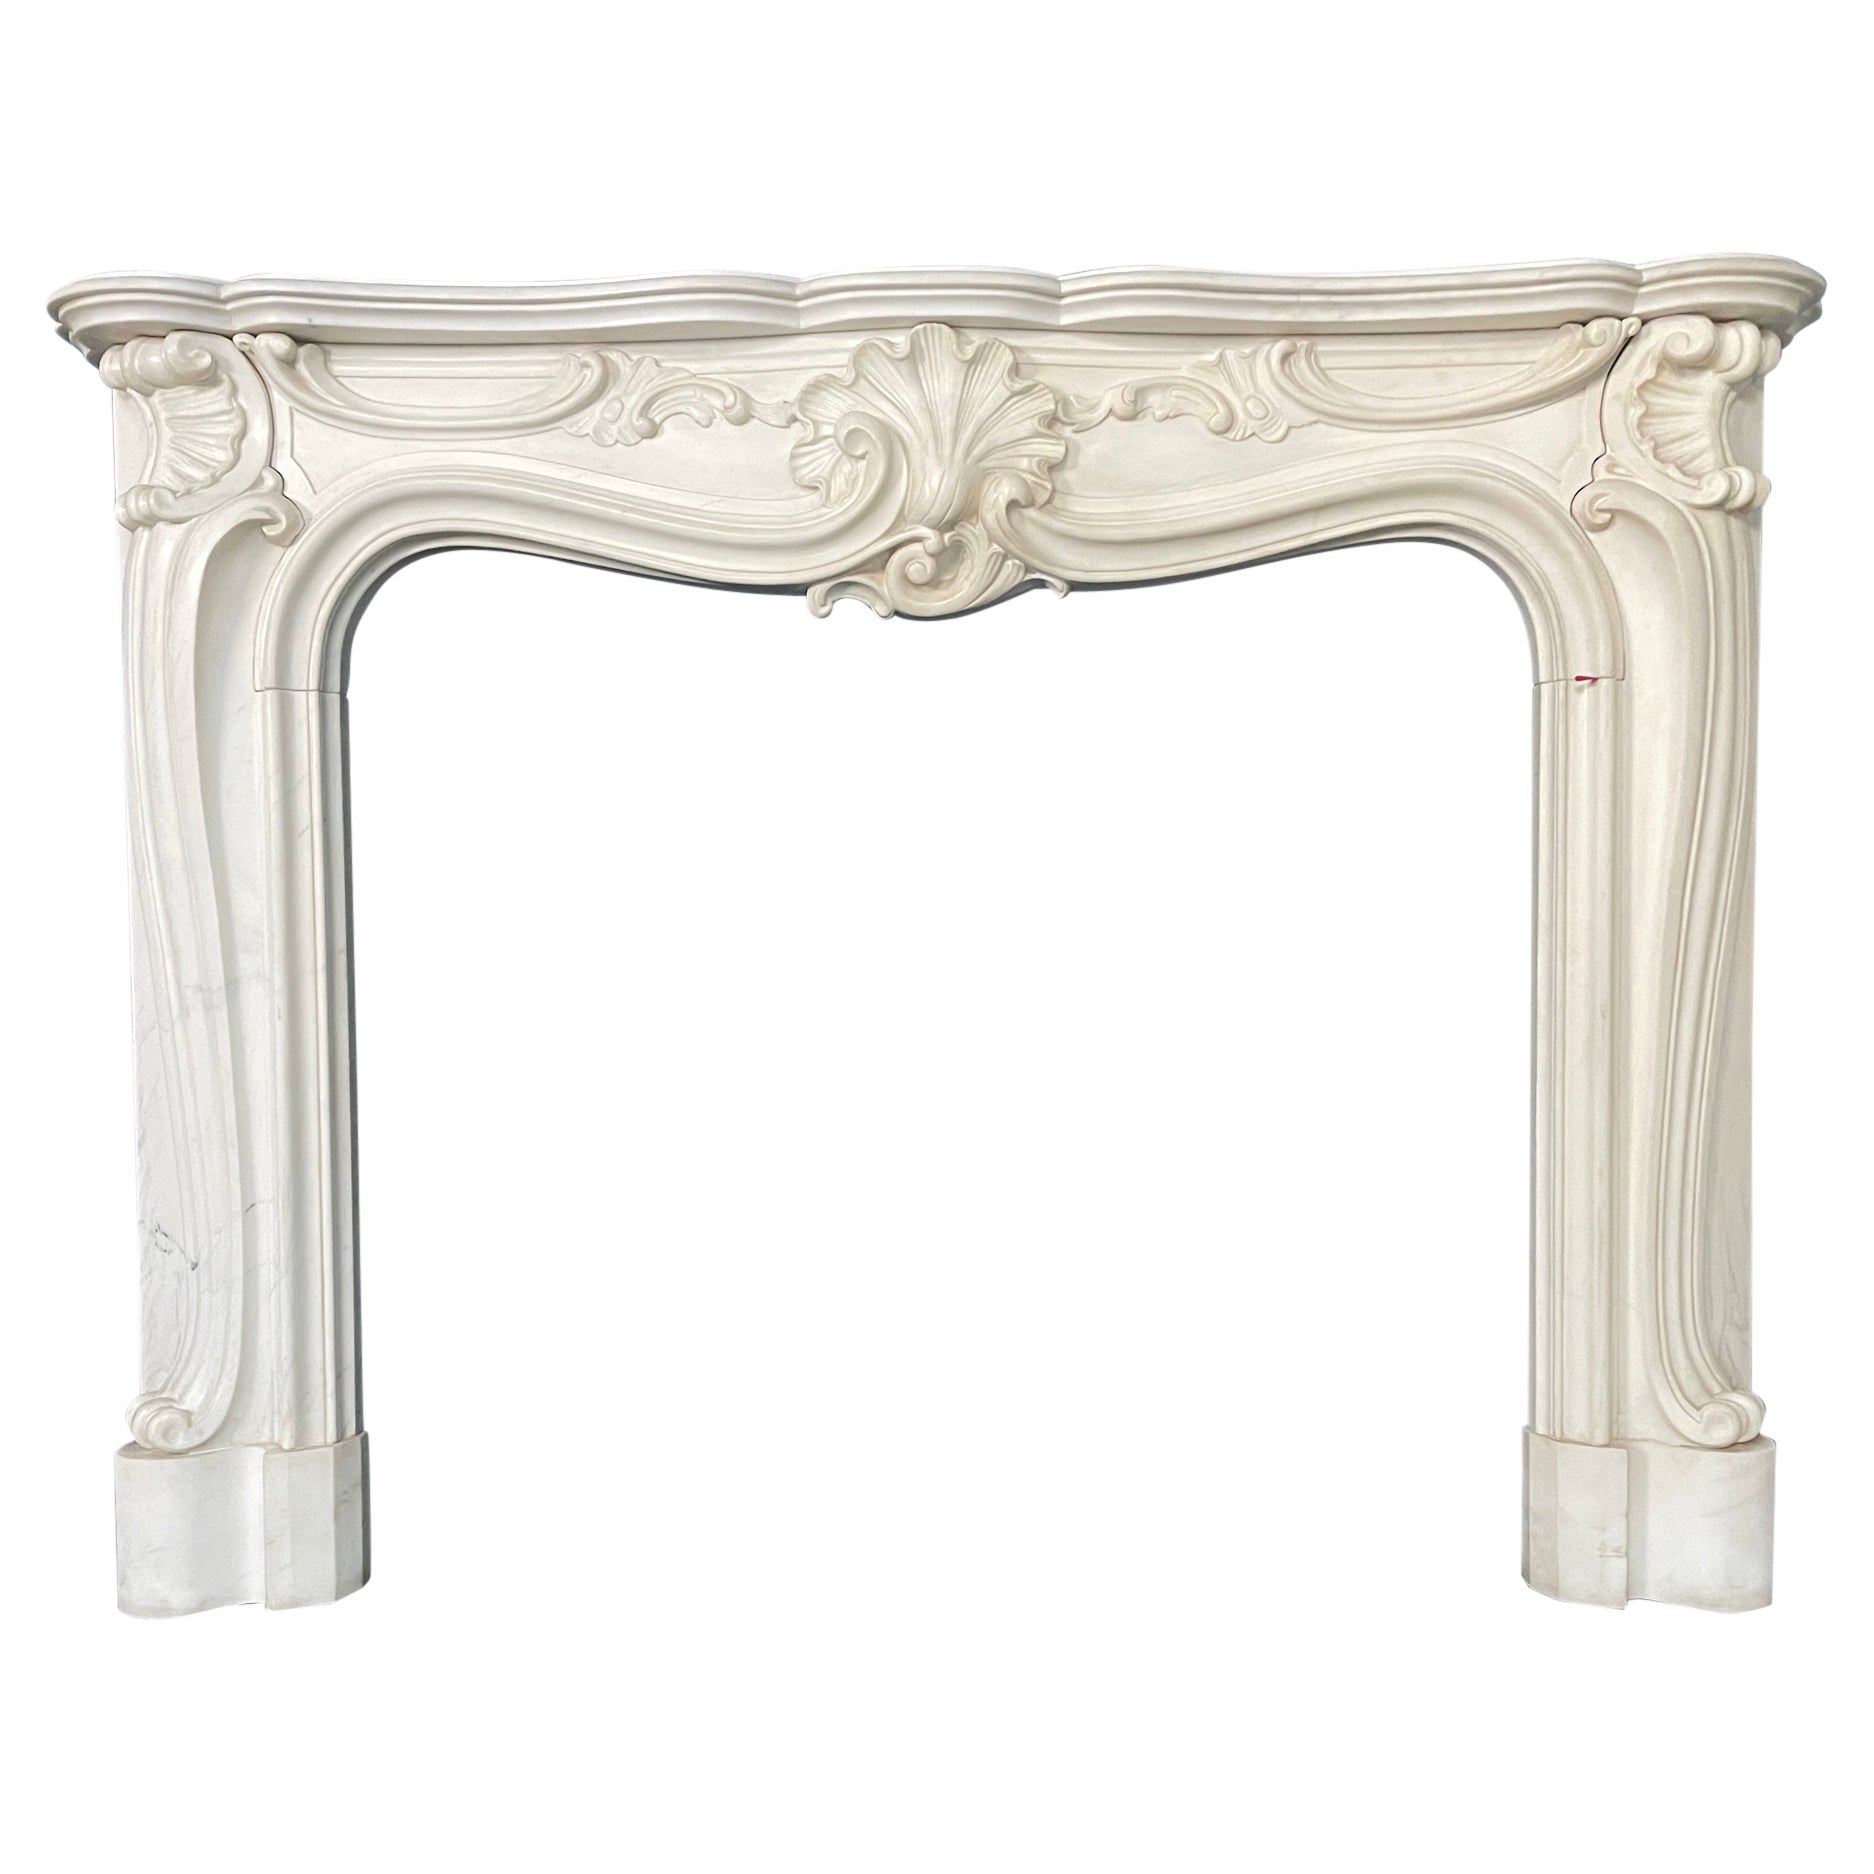 A Reclaimed Rococo French Style Marble Fireplace Mantel  For Sale